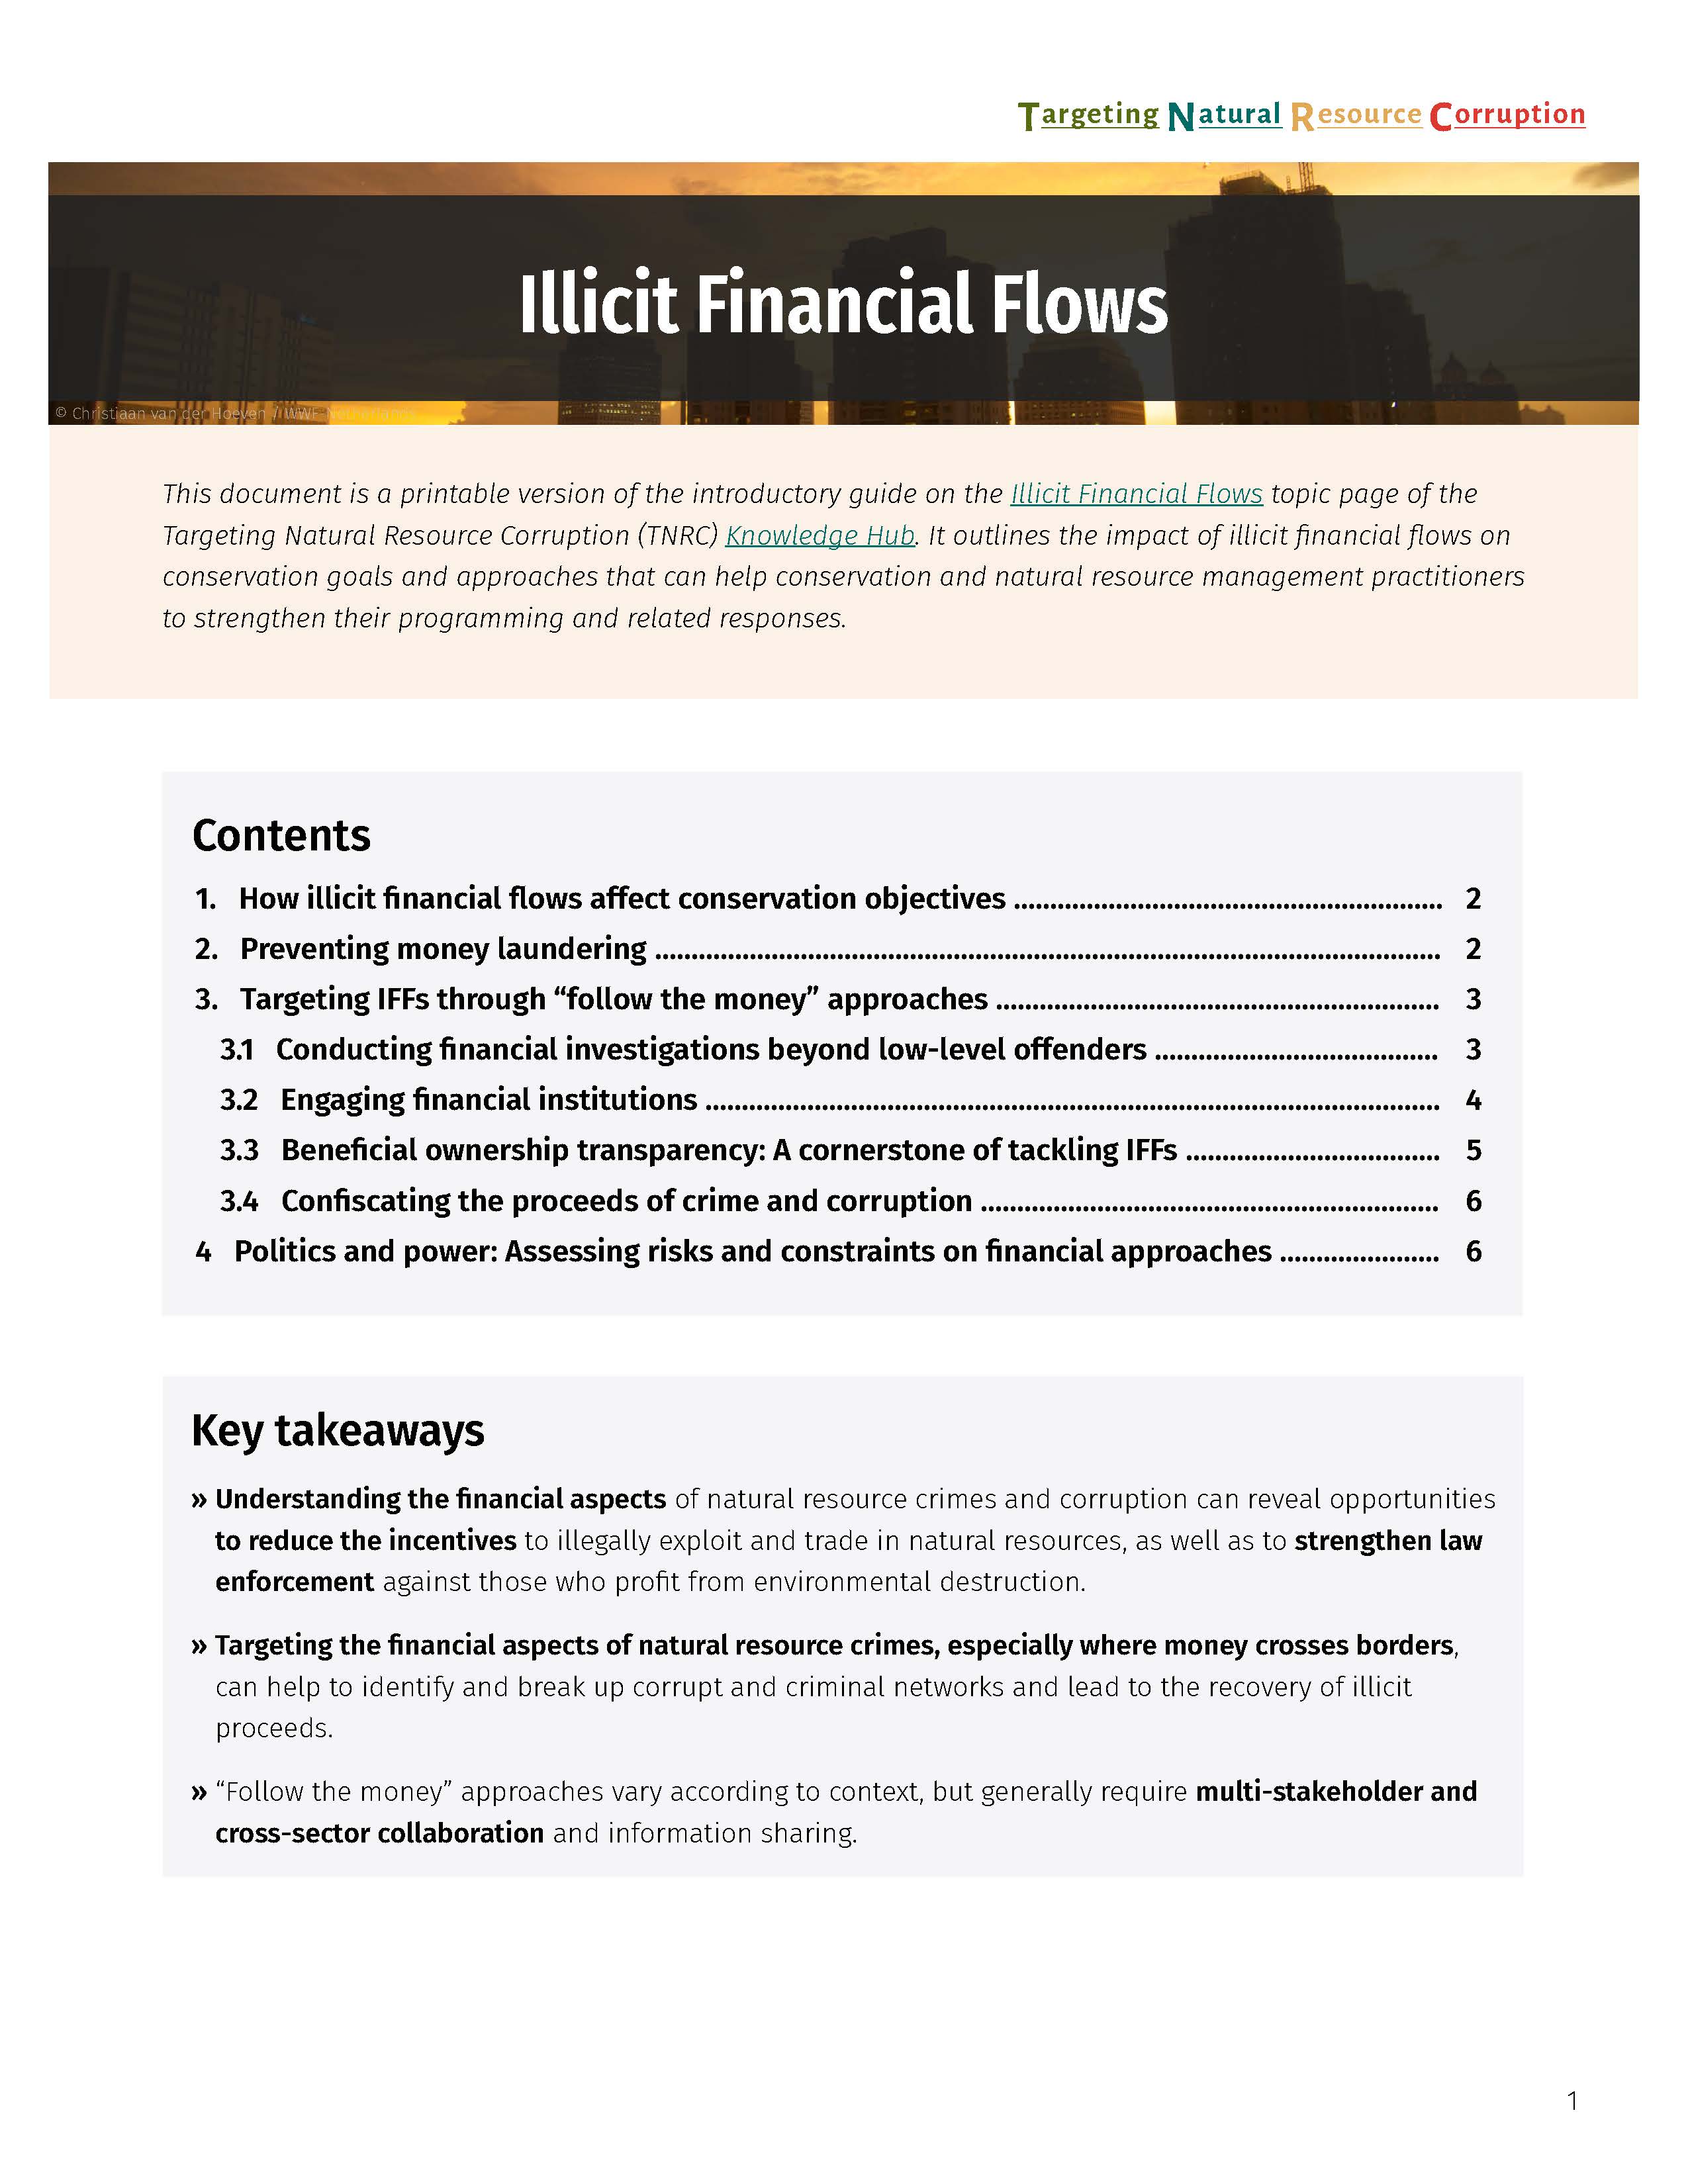 Cover page of IFFs guide on TNRC knowledge hub